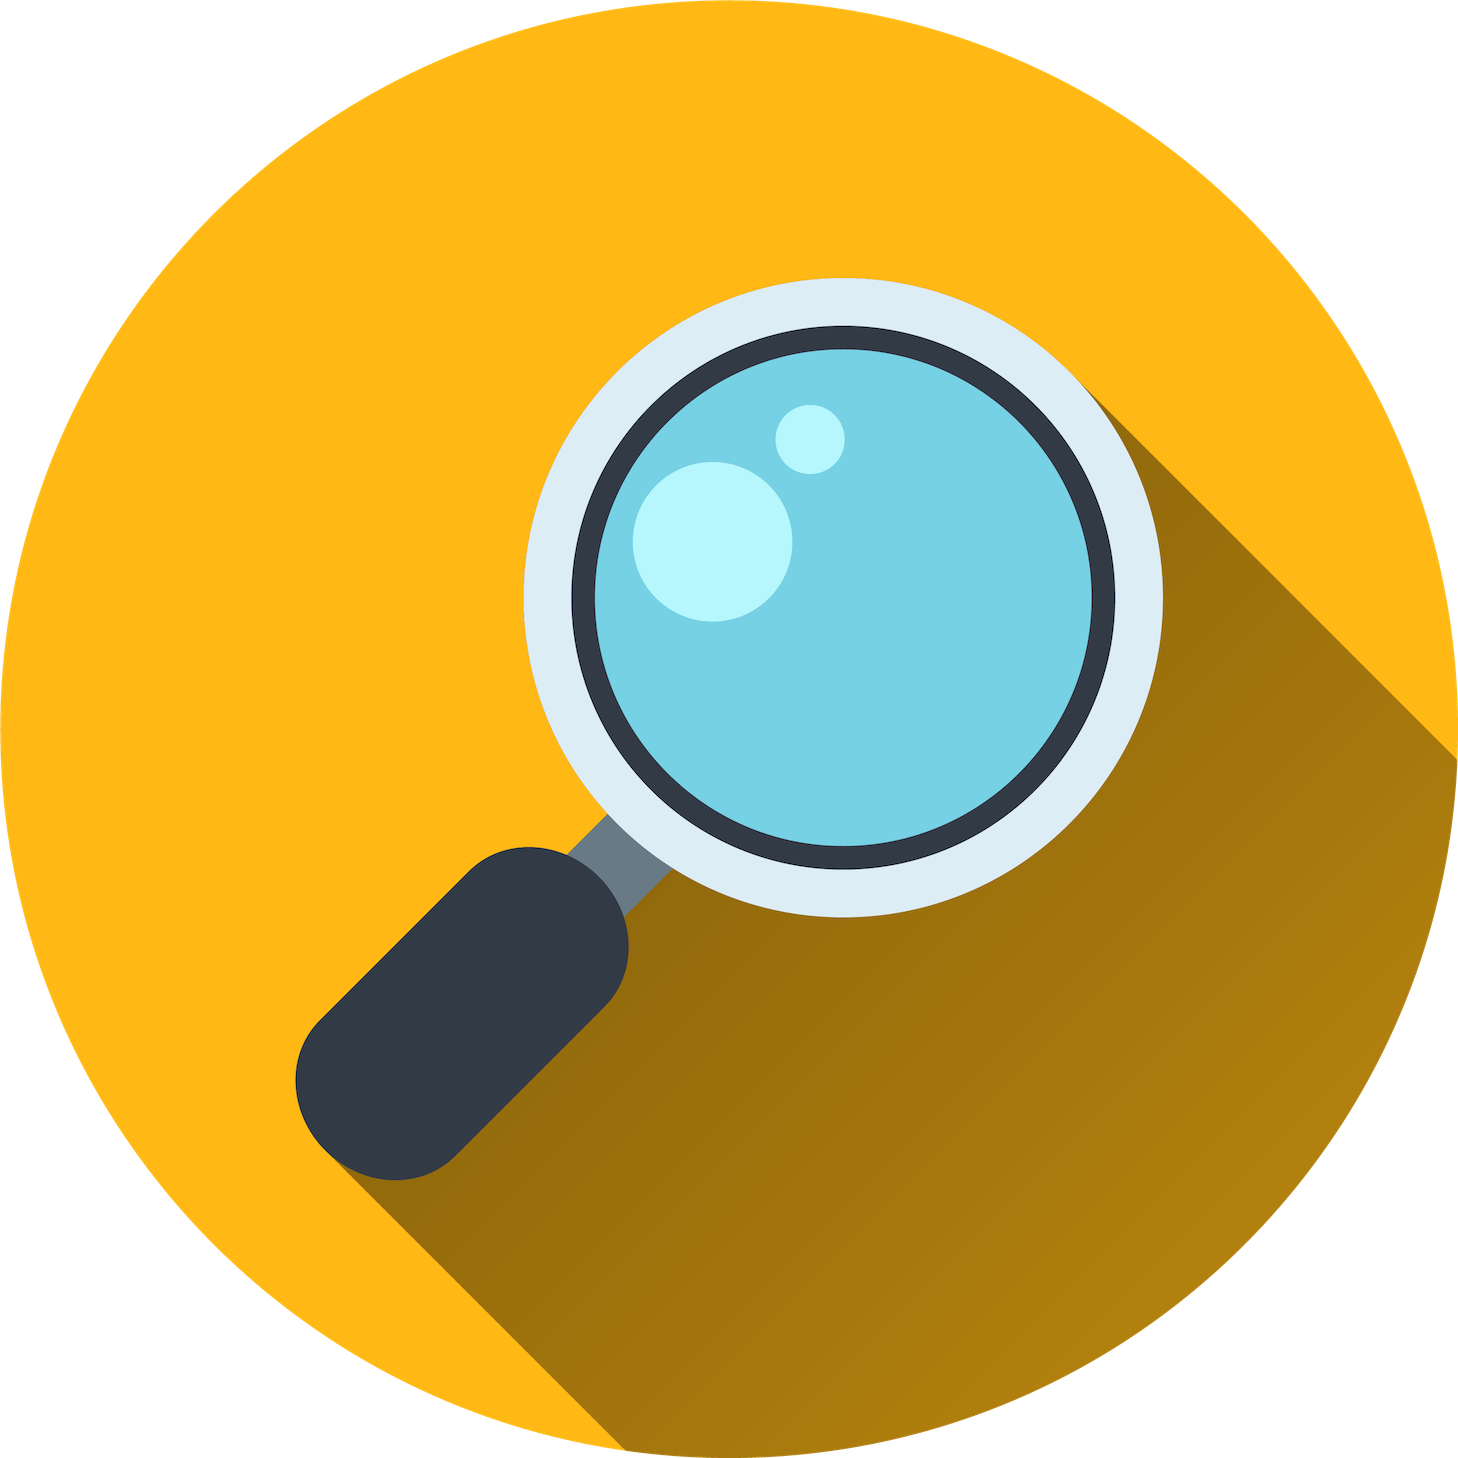 Navigation icon with magnifying glass representing searching the web or an investigation